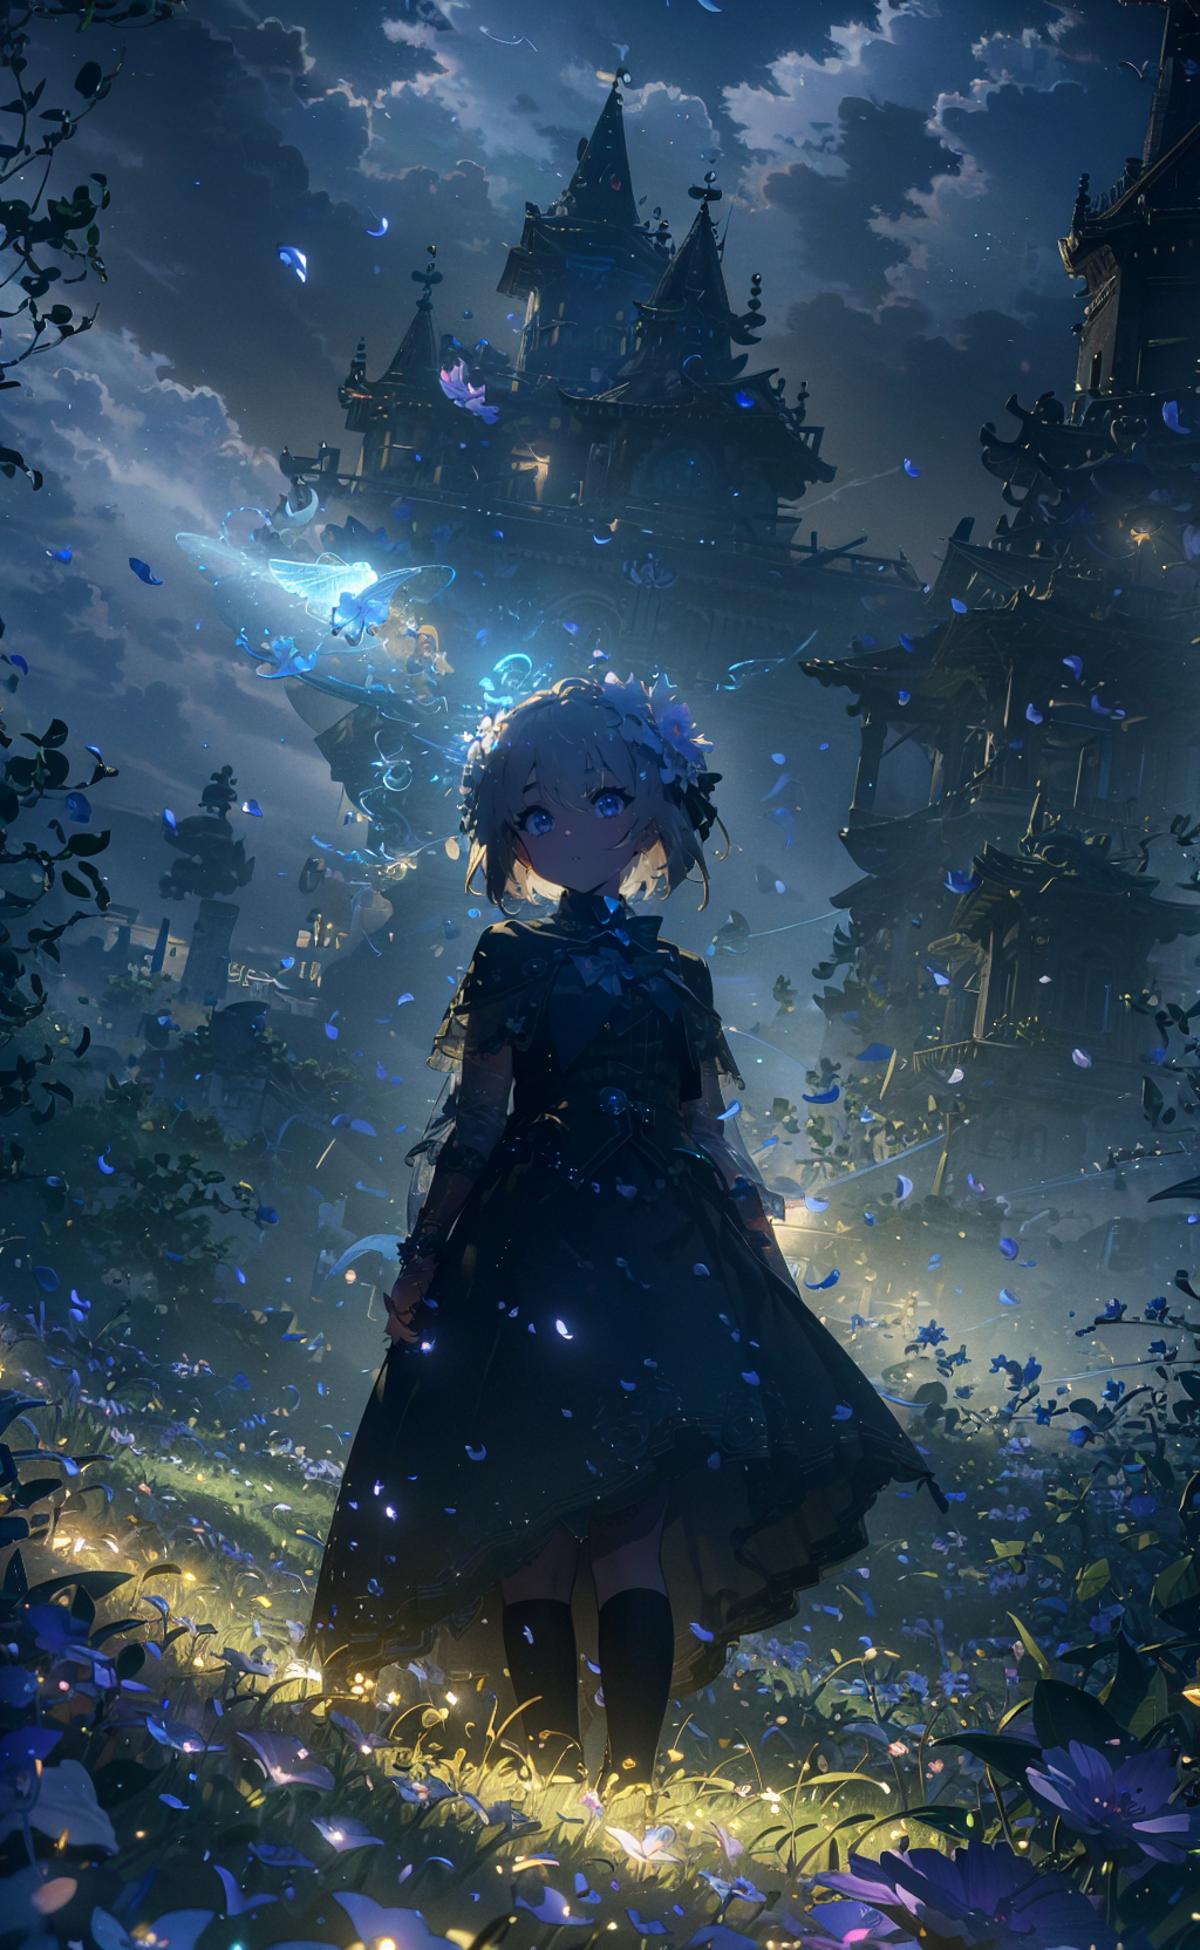 Anime girl in a blue dress standing in front of a castle in the night sky.